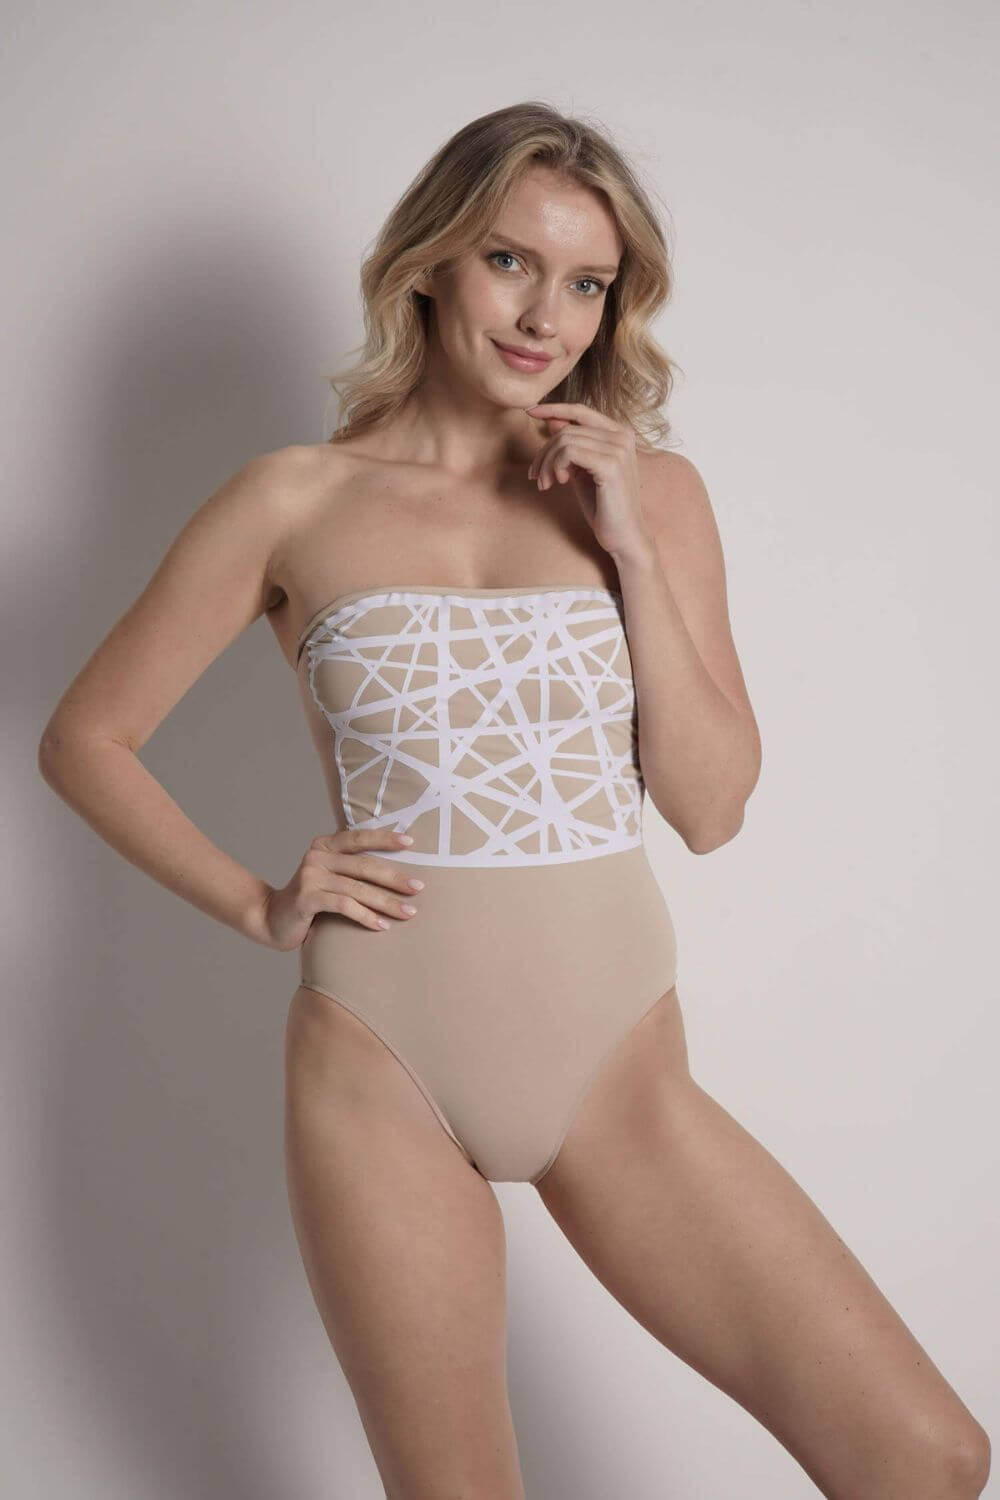 The Angela camel strapless one piece swimsuit features a geometric detail of laser-cut lycra in white. This exquisite design is permanently applied on the camel background.